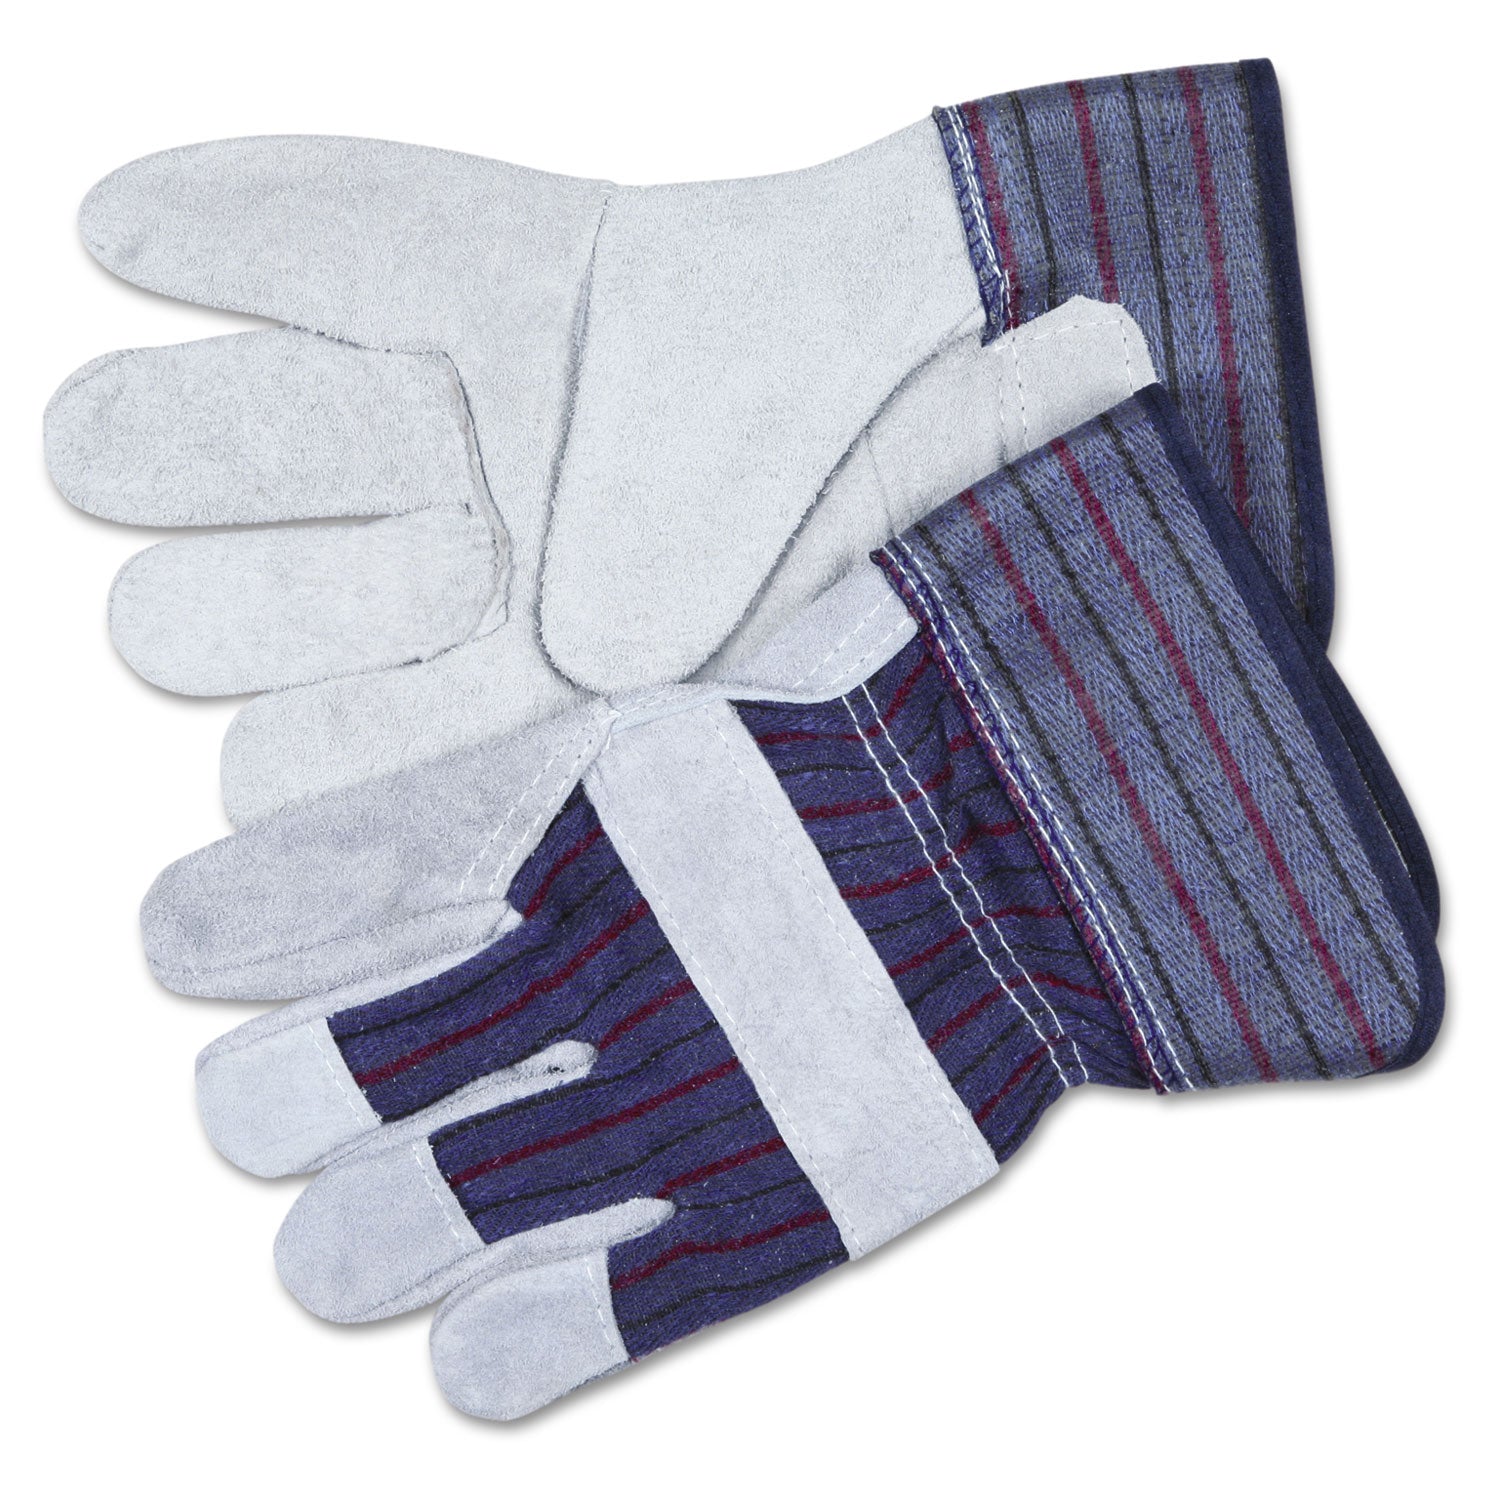 Split Leather Palm Gloves, Large, Gray, Pair - 